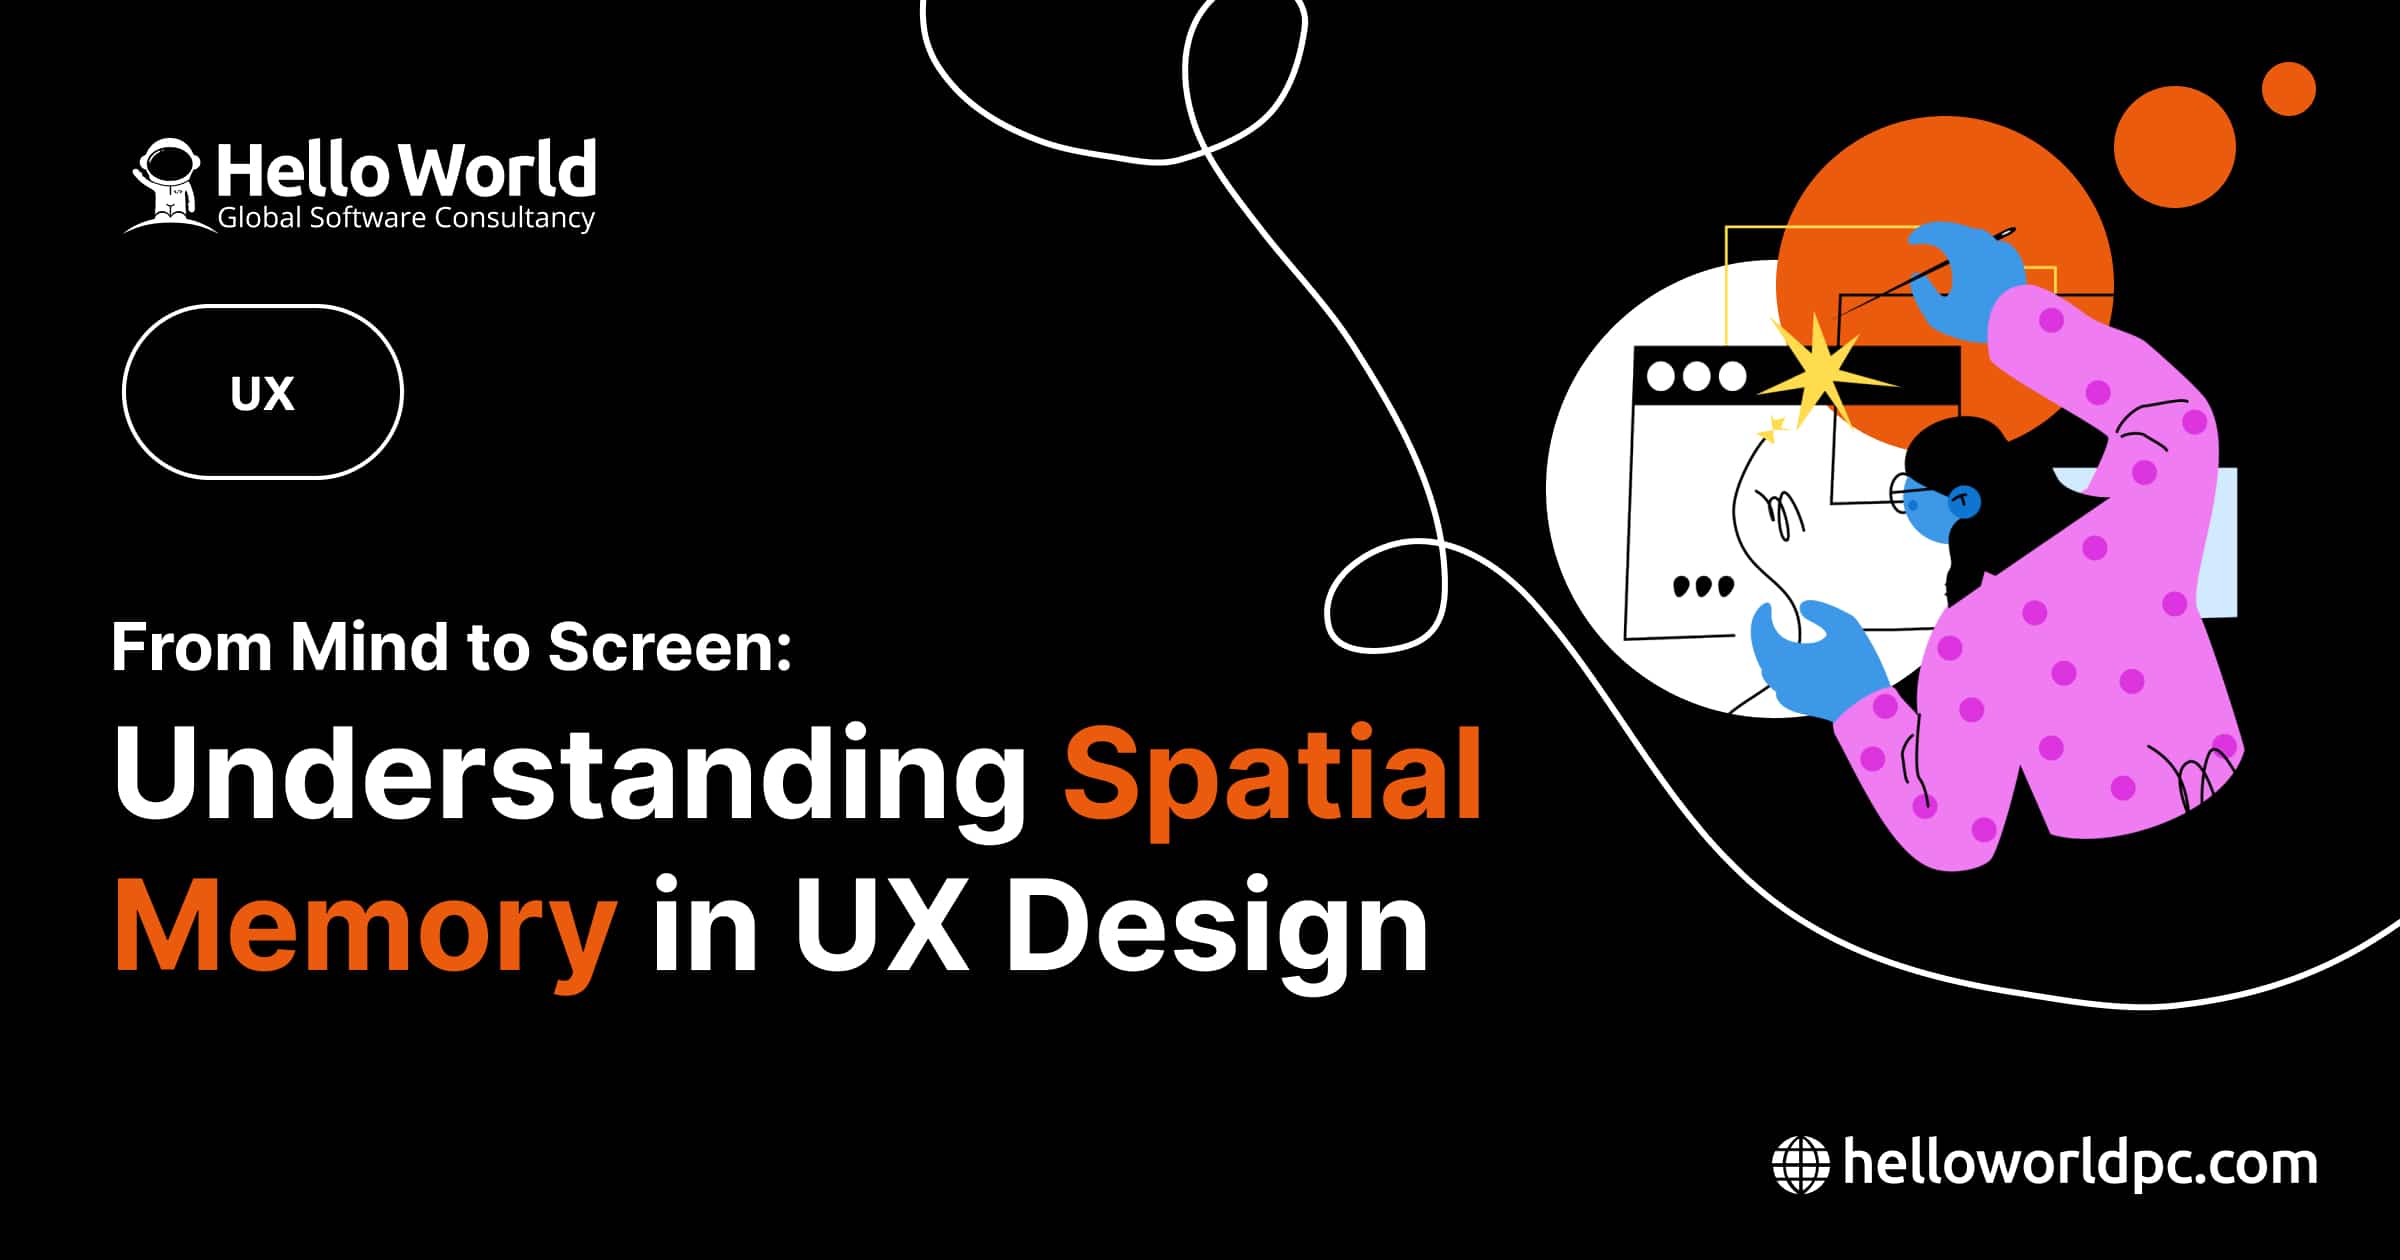 From Mind to Screen: Understanding Spatial Memory in UX Design